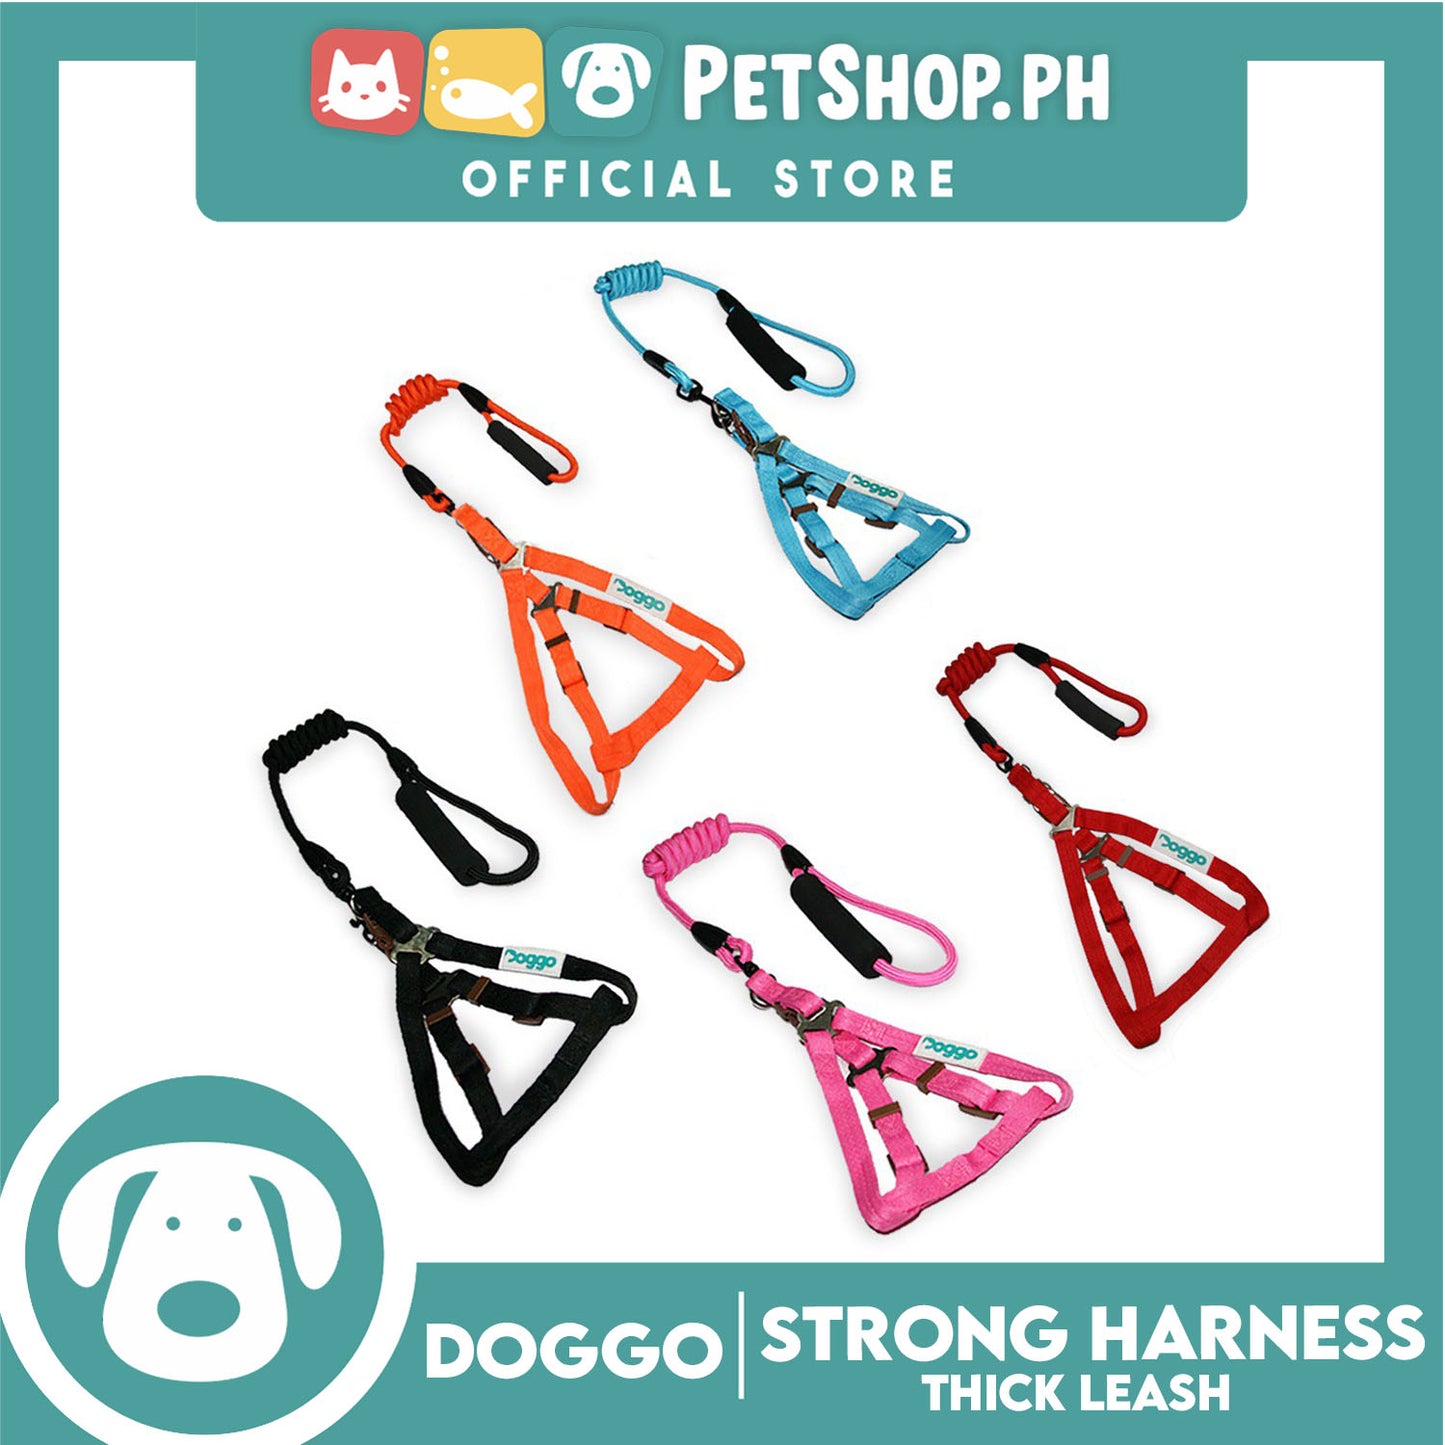 Doggo Denim Strong Harness Medium (Red) Thick Leash and Straps for Your Dog